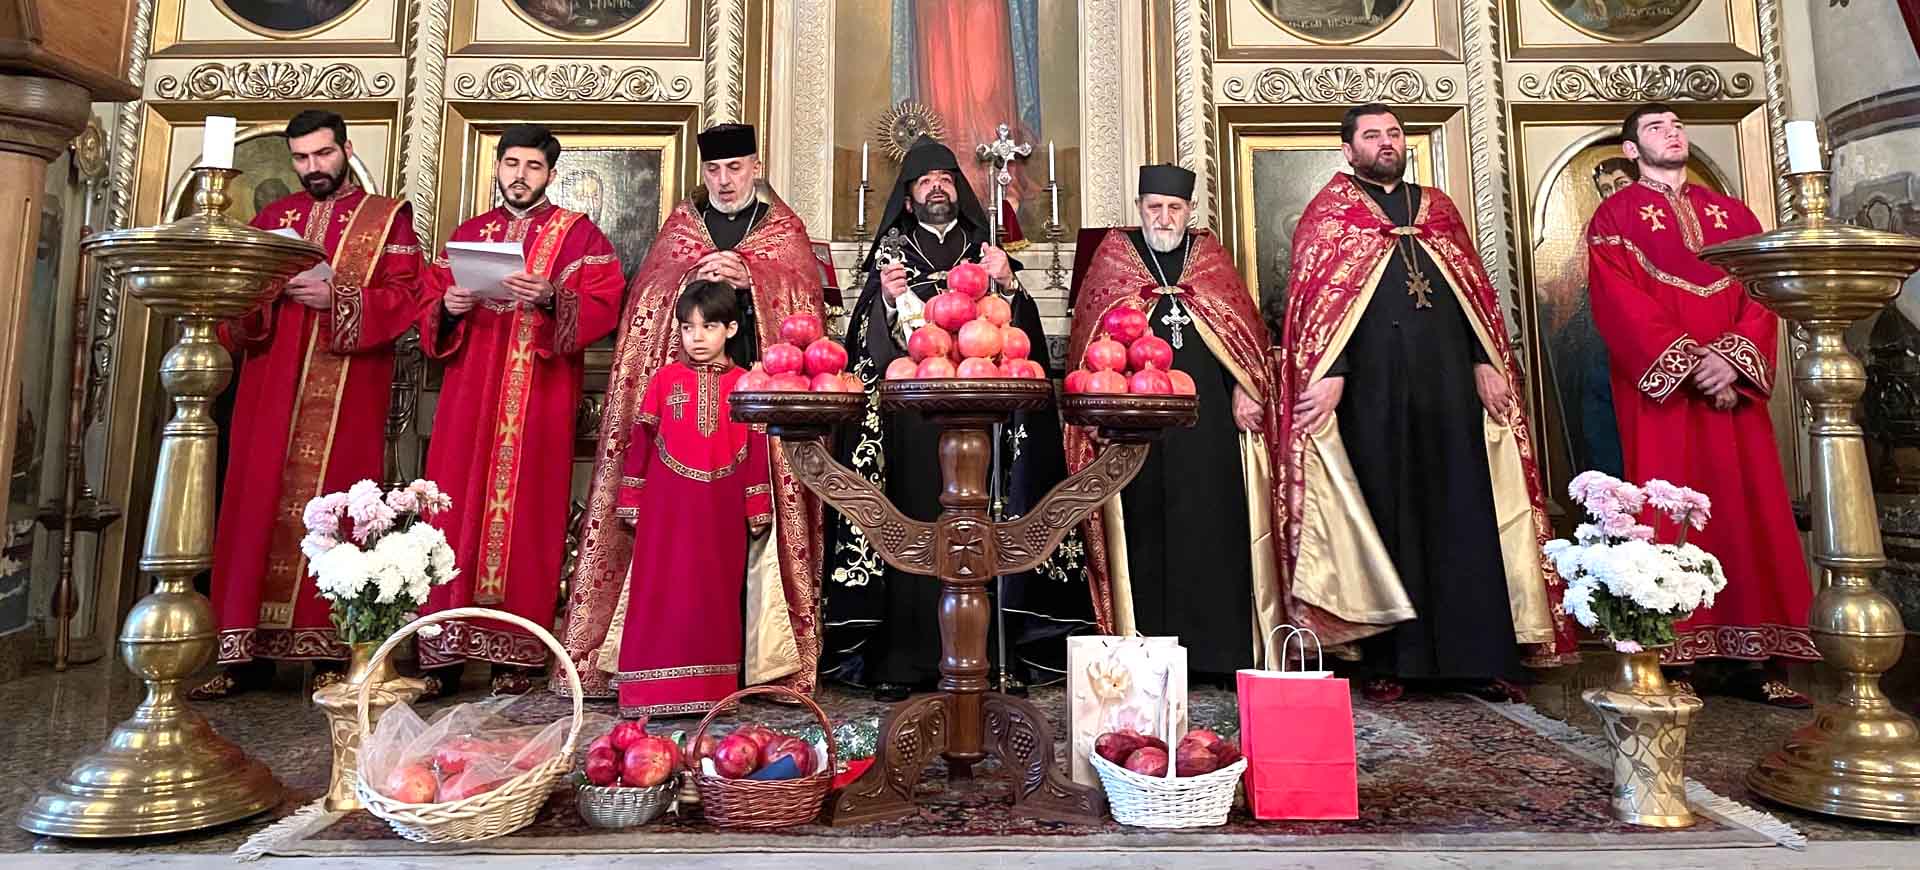 Blessing of Pomegranates Service at the Cathedral of Saint George